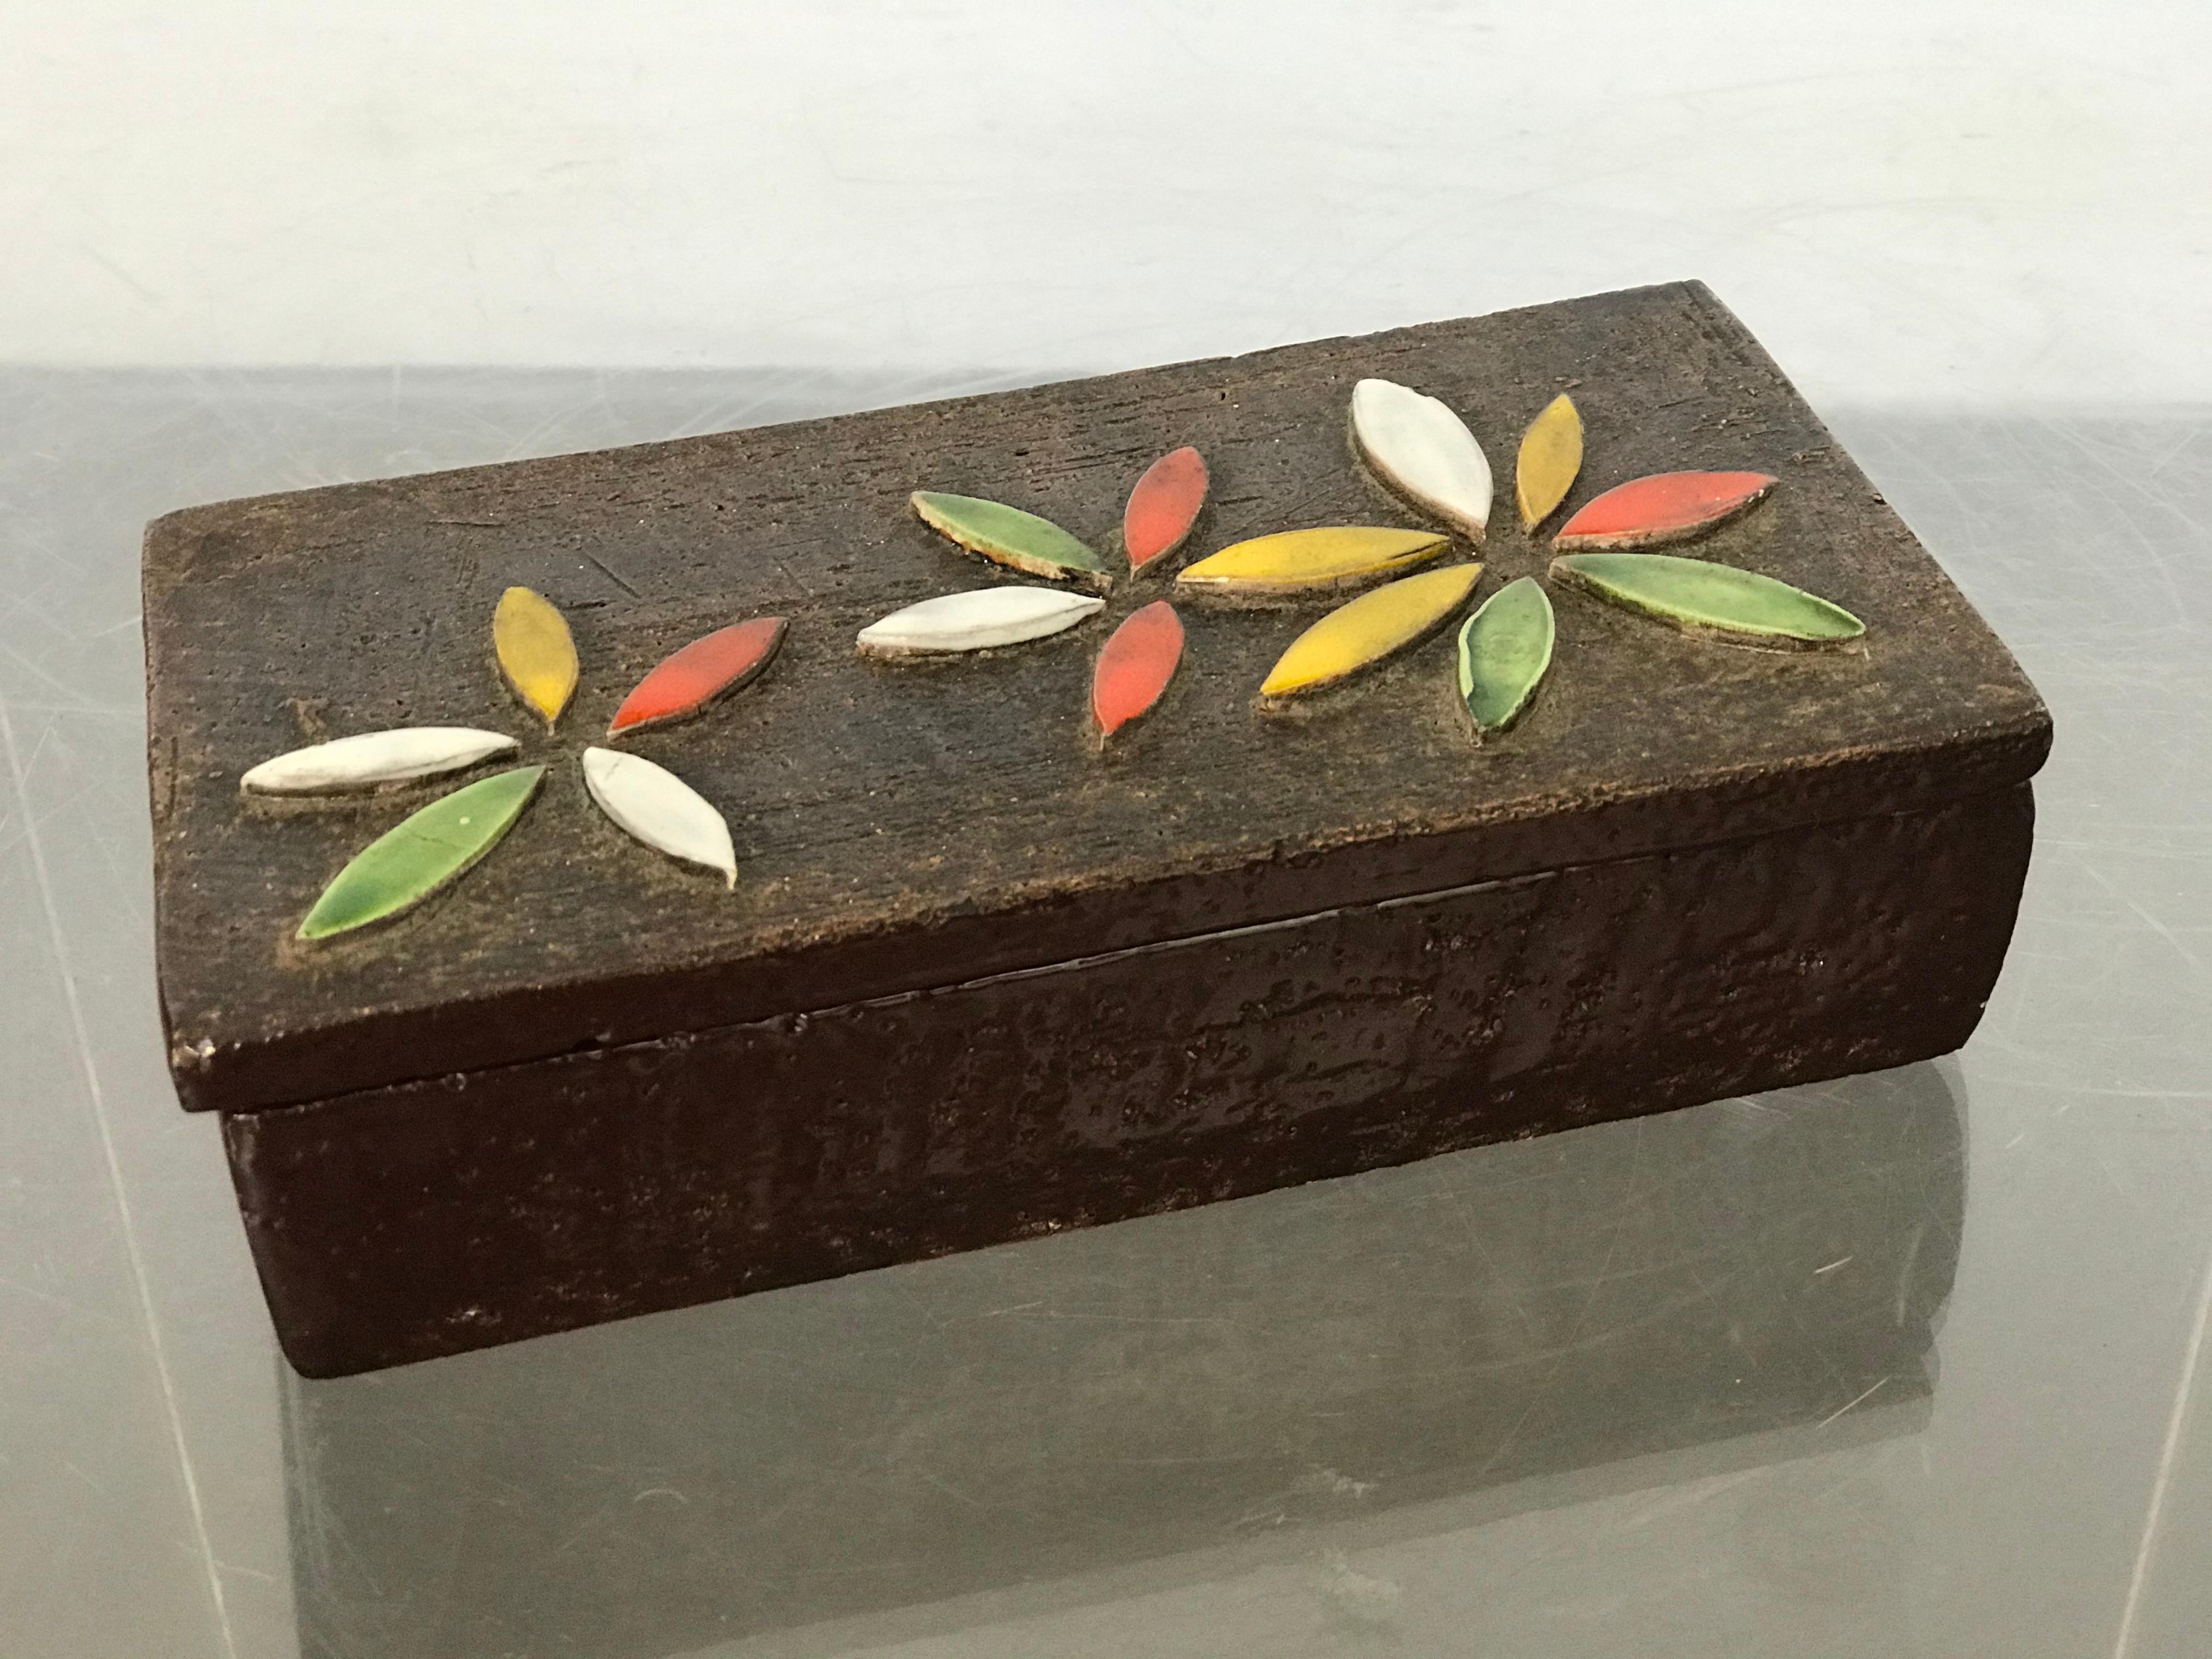 Very nice brown ceramic Bitossi box, circa 1960's. Lovely flower relief on top. Nice condition. One small hair-line crack on the top of one green flower petal (see pictures).
Measures: 8